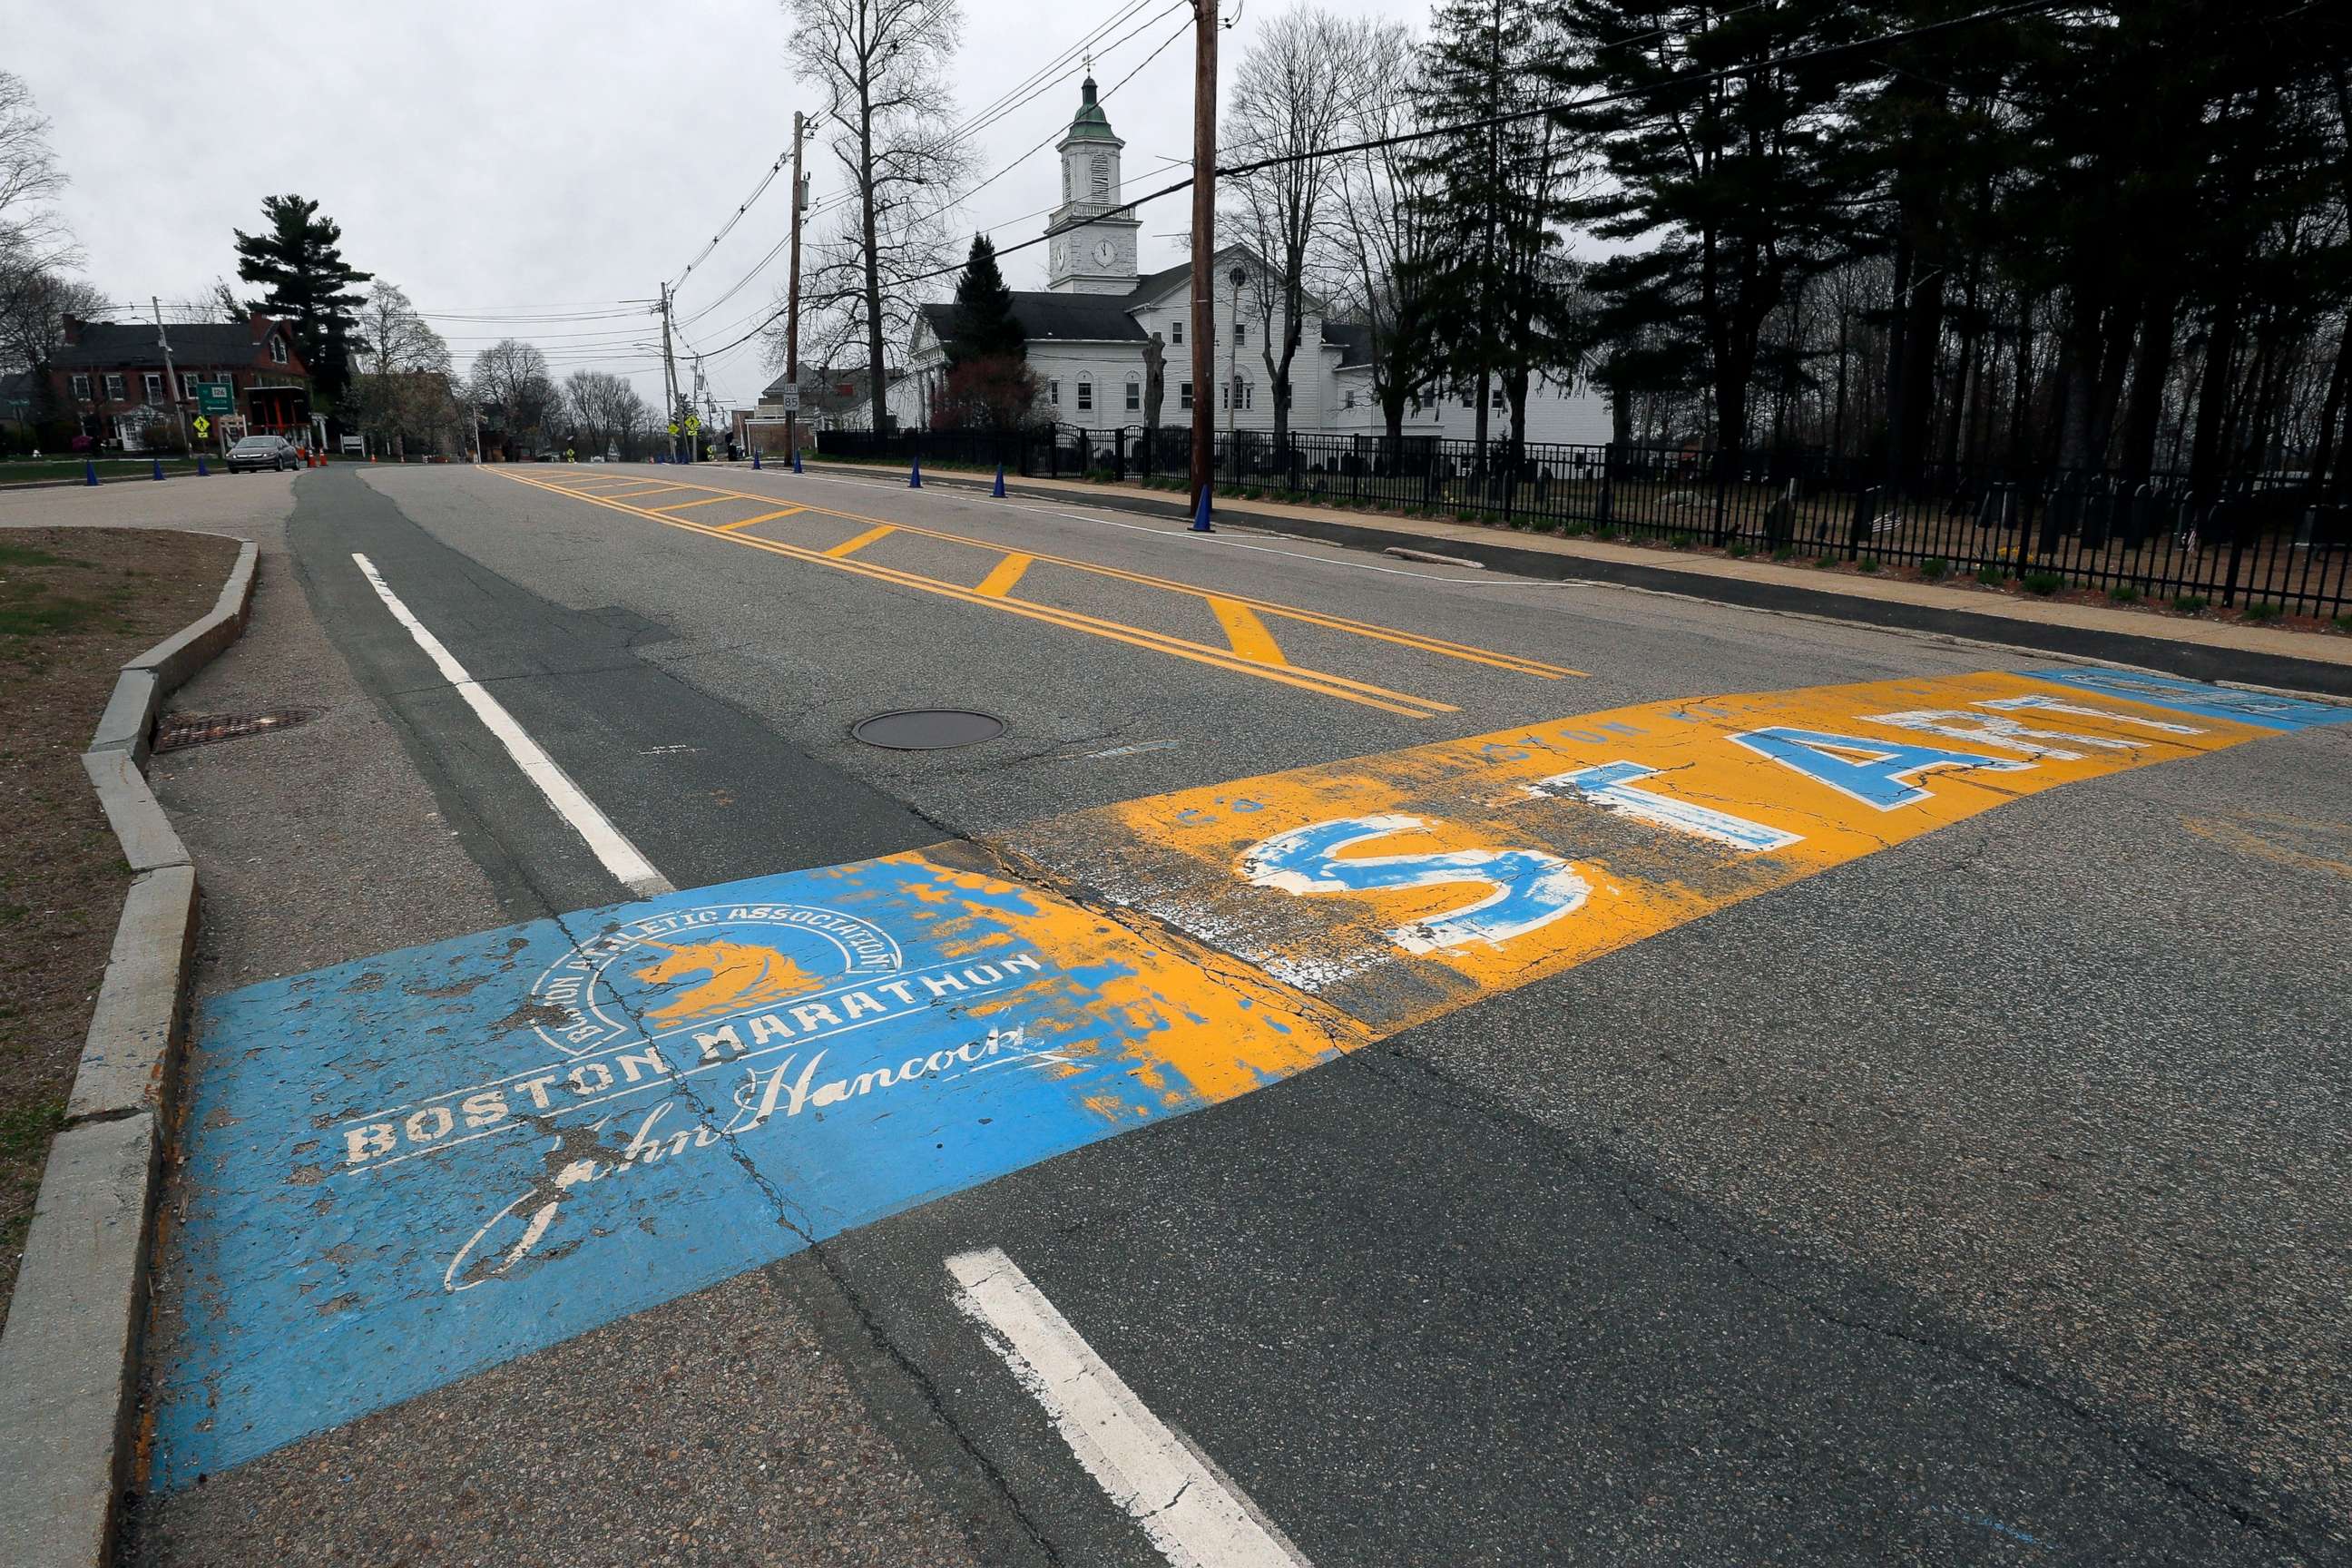 PHOTO: The Boston Marathon start line in Hopkinton, Mass., is vacant on the scheduled day of the 124th race, due to the COVID-19 virus outbreak.